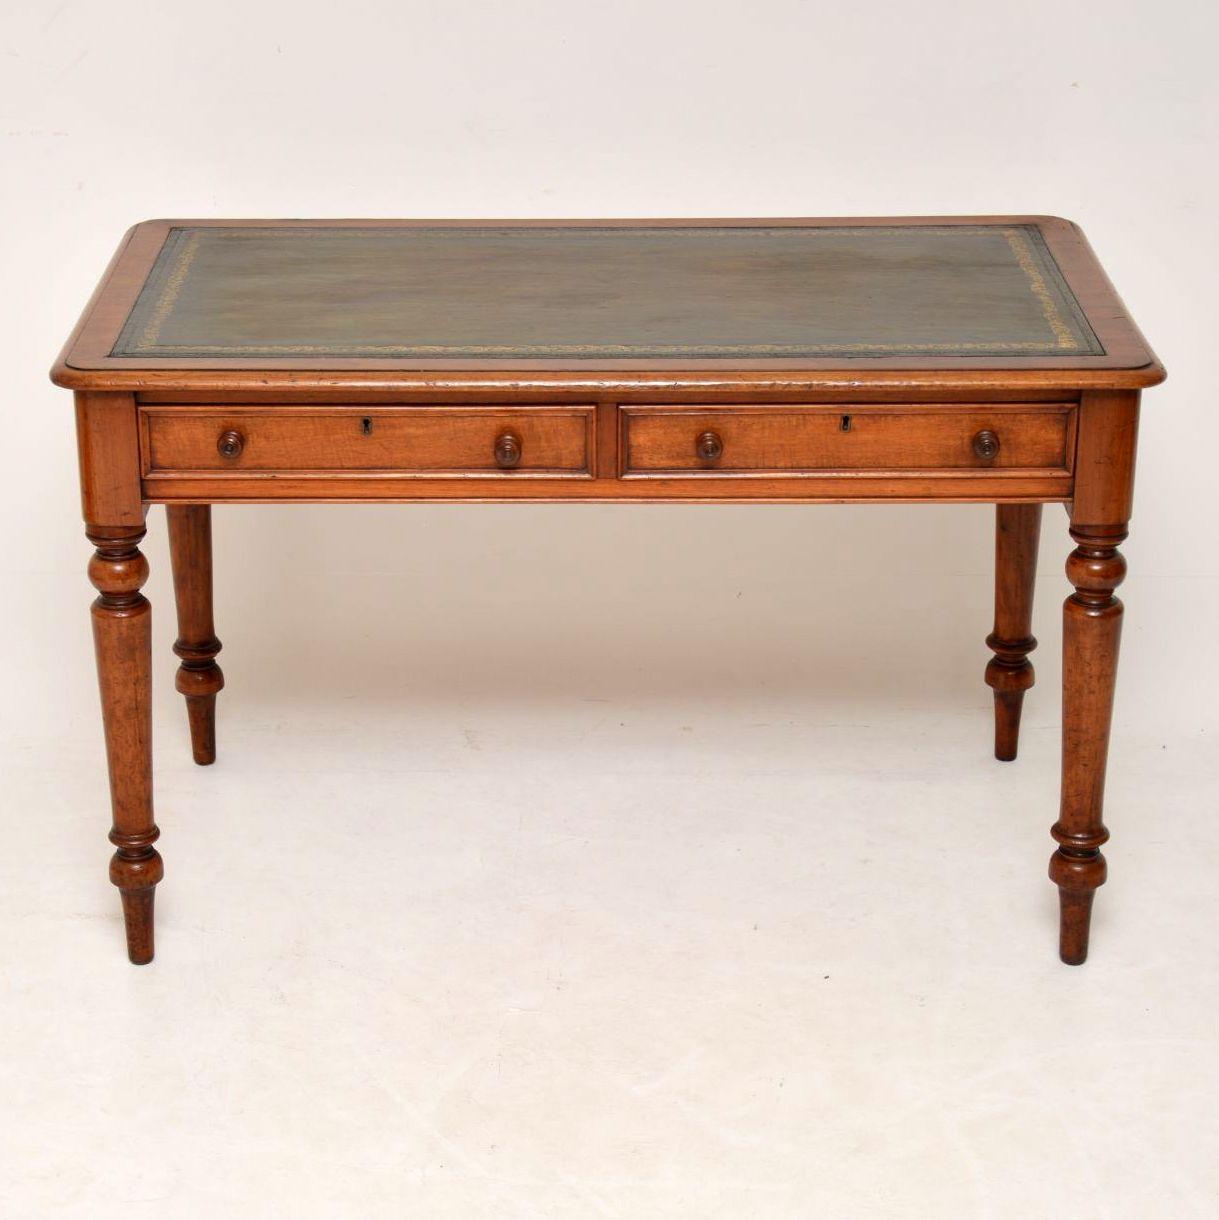 Antique Victorian mahogany desk with a tooled leather writing surface and all in good condition. It has a polished back, two drawers with turned mahogany handles, original locks and sits on boldly turned legs. This desk is a decent size with plenty